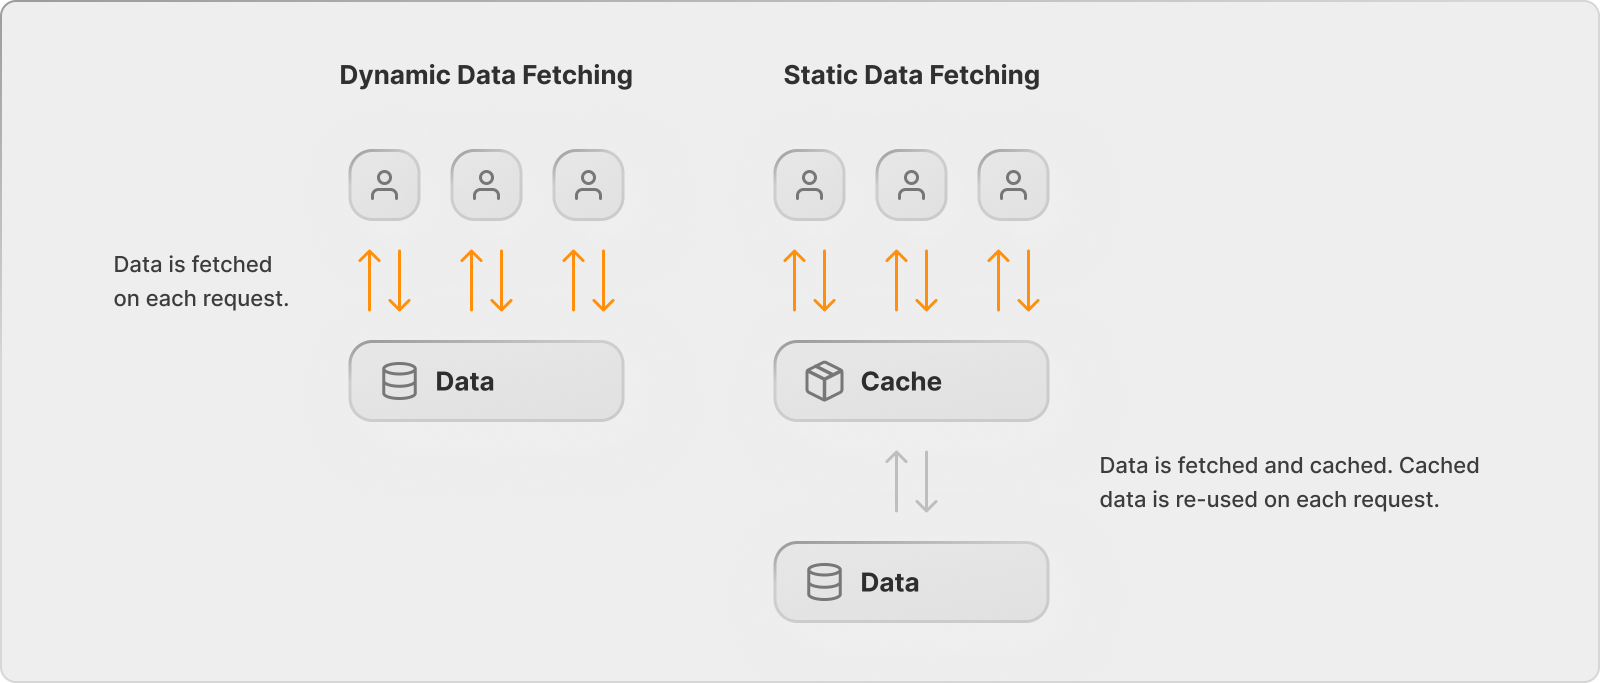 Dynamic data requires data to be fetched anew on each request. Static data allows cached data to be reused on each request.